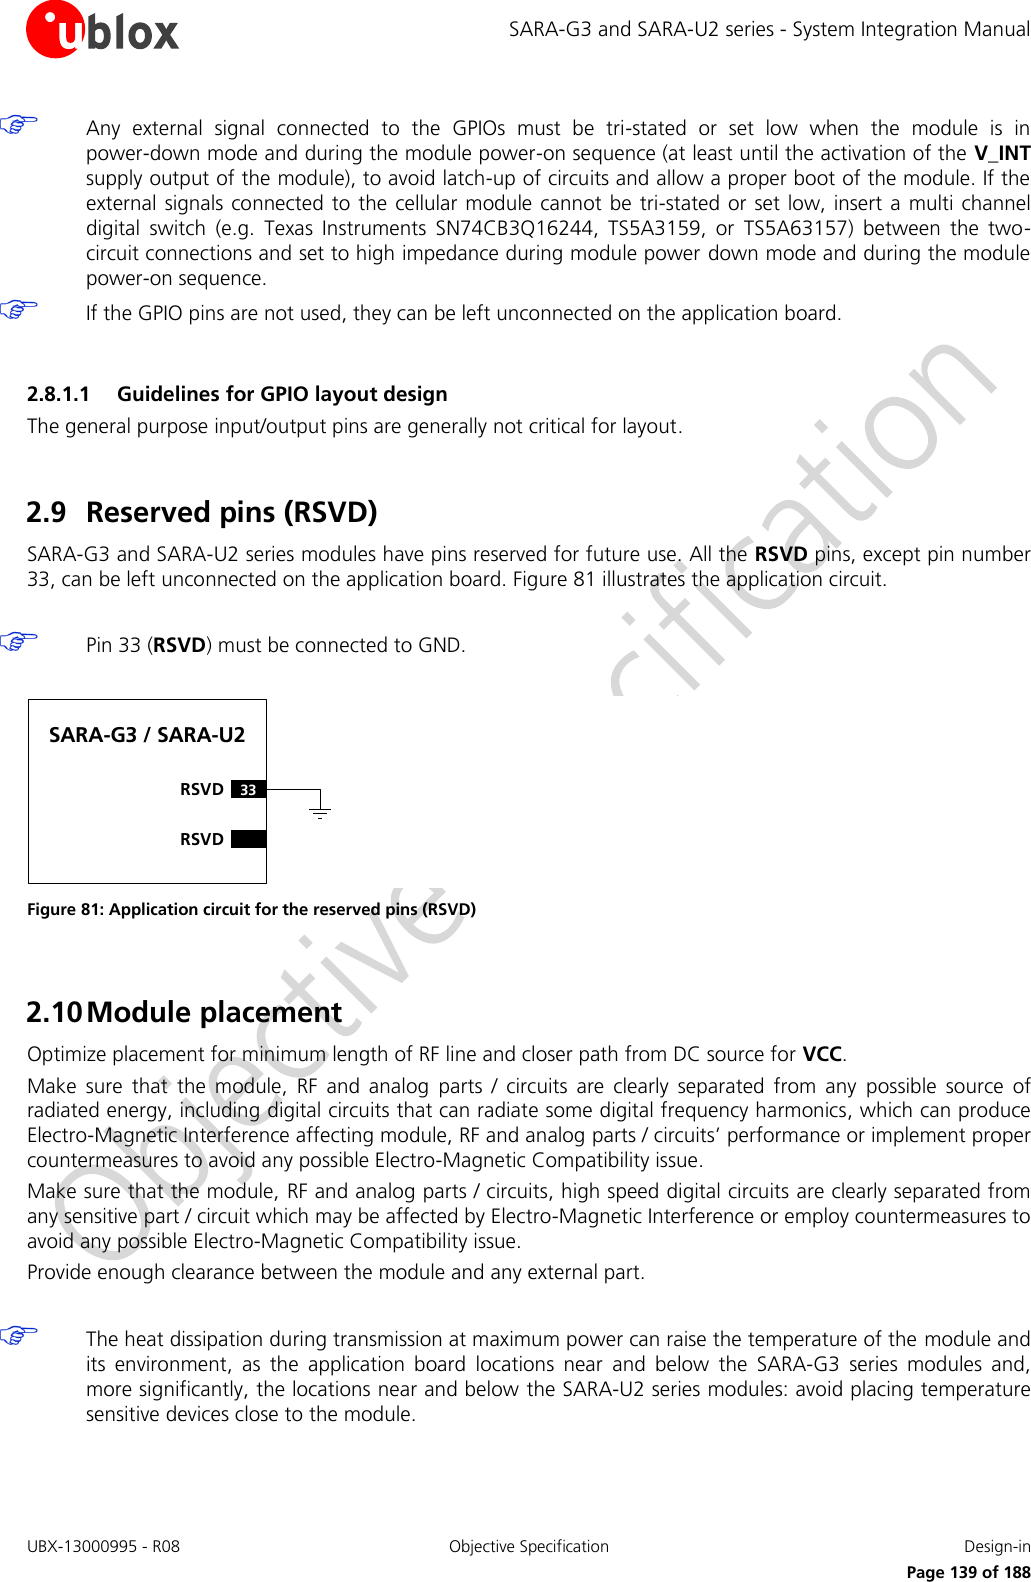 SARA-G3 and SARA-U2 series - System Integration Manual UBX-13000995 - R08  Objective Specification  Design-in     Page 139 of 188  Any  external  signal  connected  to  the  GPIOs  must  be  tri-stated  or  set  low  when  the  module  is  in power-down mode and during the module power-on sequence (at least until the activation of the V_INT supply output of the module), to avoid latch-up of circuits and allow a proper boot of the module. If the external  signals connected to  the cellular module cannot be  tri-stated or set  low, insert a multi channel digital  switch  (e.g.  Texas  Instruments  SN74CB3Q16244,  TS5A3159,  or  TS5A63157)  between  the  two-circuit connections and set to high impedance during module power down mode and during the module power-on sequence.  If the GPIO pins are not used, they can be left unconnected on the application board.  2.8.1.1 Guidelines for GPIO layout design The general purpose input/output pins are generally not critical for layout.  2.9 Reserved pins (RSVD) SARA-G3 and SARA-U2 series modules have pins reserved for future use. All the RSVD pins, except pin number 33, can be left unconnected on the application board. Figure 81 illustrates the application circuit.   Pin 33 (RSVD) must be connected to GND.  SARA-G3 / SARA-U233RSVDRSVD Figure 81: Application circuit for the reserved pins (RSVD)  2.10 Module placement Optimize placement for minimum length of RF line and closer path from DC source for VCC. Make  sure  that  the  module,  RF  and  analog  parts  /  circuits  are  clearly  separated  from  any  possible  source  of radiated energy, including digital circuits that can radiate some digital frequency harmonics, which can produce Electro-Magnetic Interference affecting module, RF and analog parts / circuits’ performance or implement proper countermeasures to avoid any possible Electro-Magnetic Compatibility issue. Make sure that the module, RF and analog parts / circuits, high speed digital circuits are clearly separated from any sensitive part / circuit which may be affected by Electro-Magnetic Interference or employ countermeasures to avoid any possible Electro-Magnetic Compatibility issue. Provide enough clearance between the module and any external part.   The heat dissipation during transmission at maximum power can raise the temperature of the module and its  environment,  as  the  application  board  locations  near  and  below  the  SARA-G3  series  modules  and, more significantly, the locations near and below the SARA-U2 series modules: avoid placing temperature sensitive devices close to the module.  